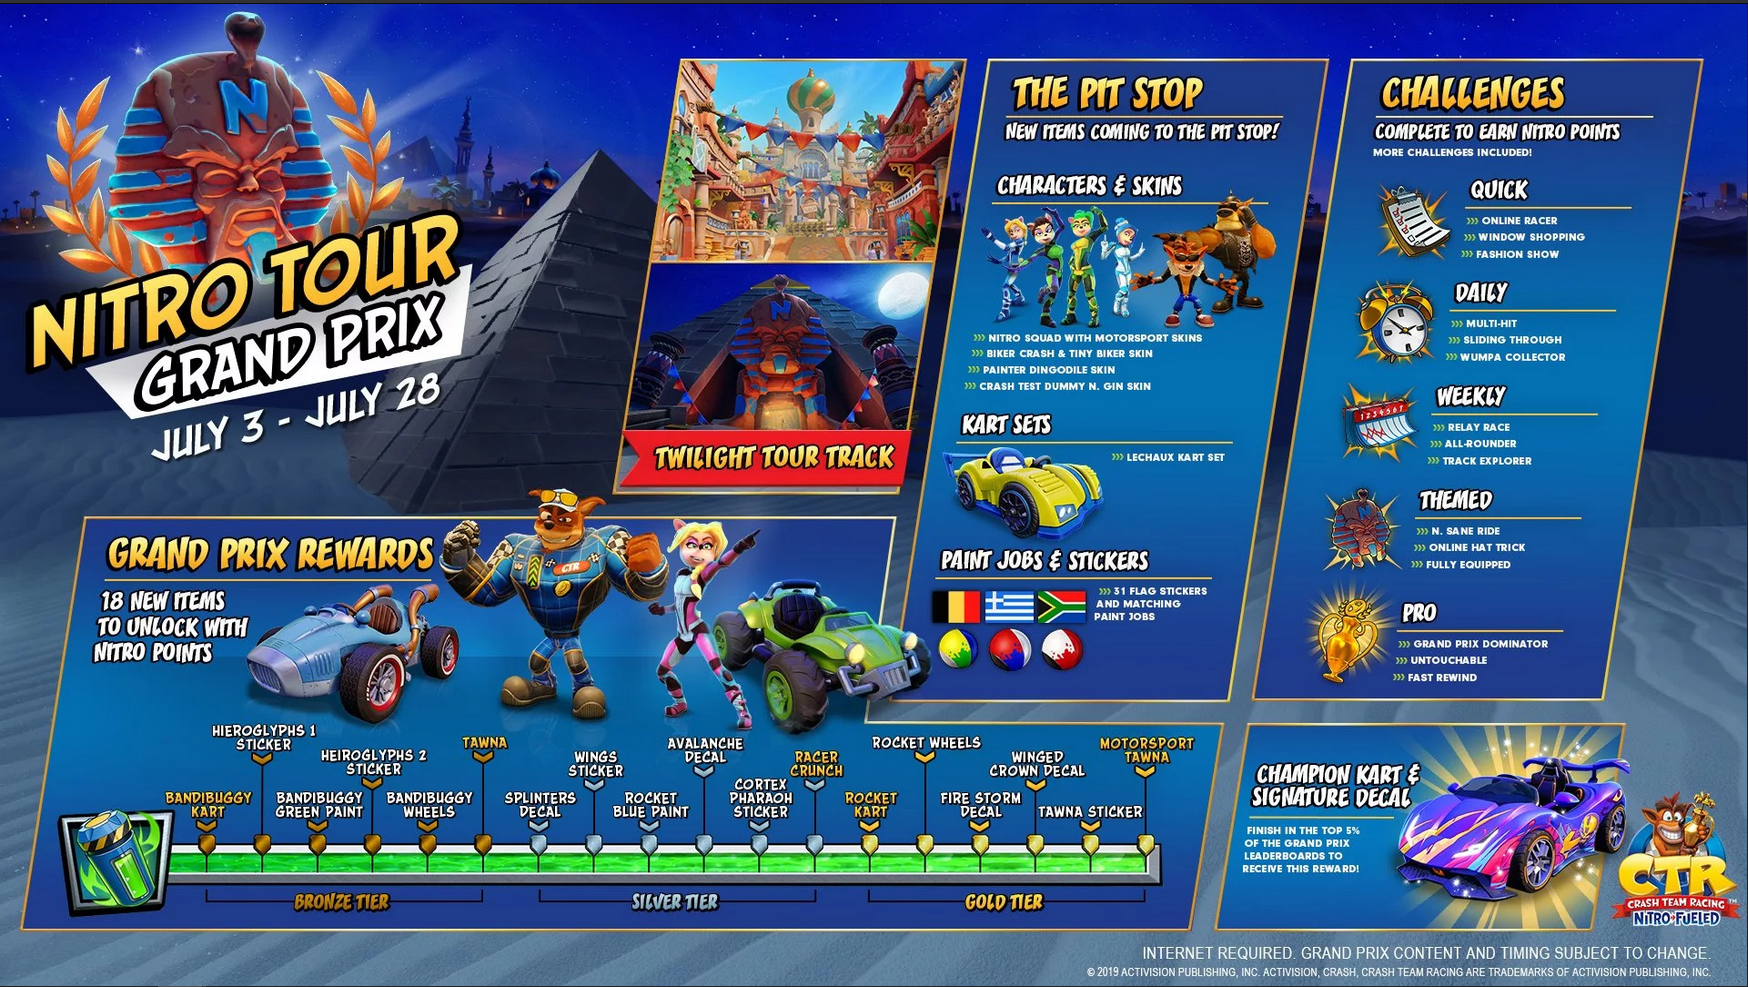 The Nitro Tour Grand Prix for Crash Team Racing Nitro-Fueled arrives tomorrow, and heres all the rewards you can earn from participating in it.